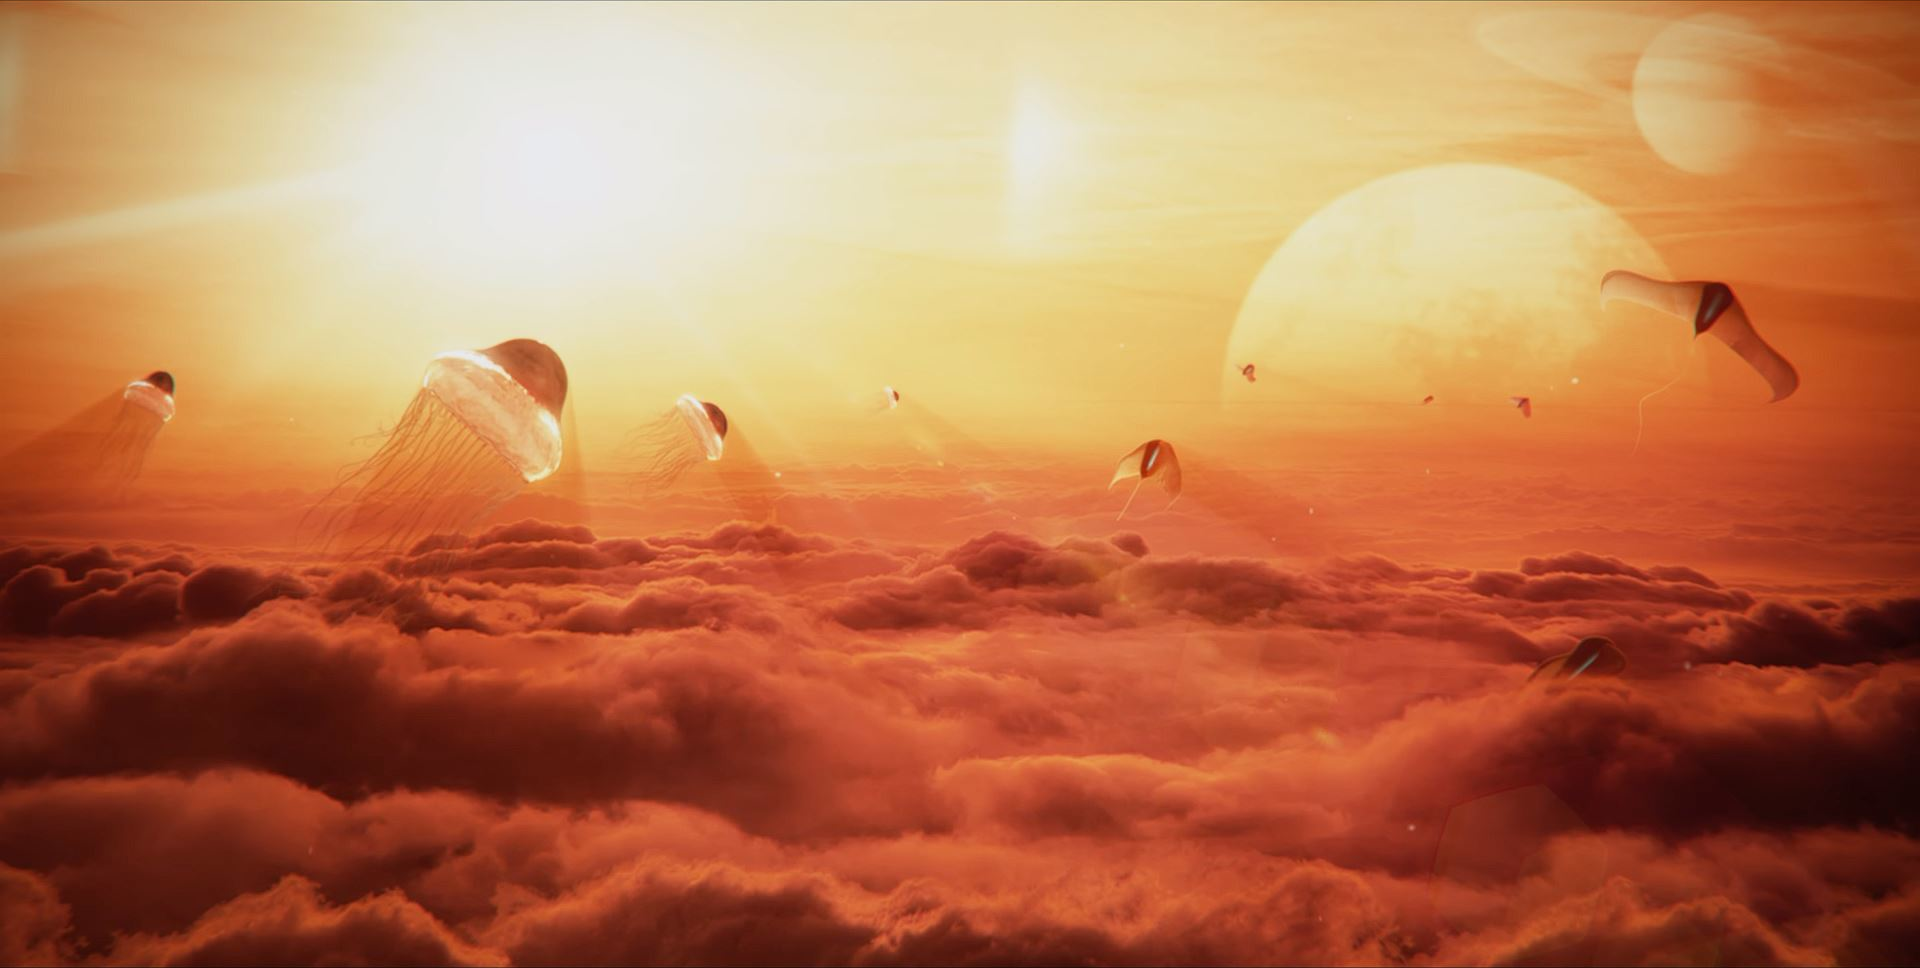 Possible alien life above the clouds of an unknown, habitable planet